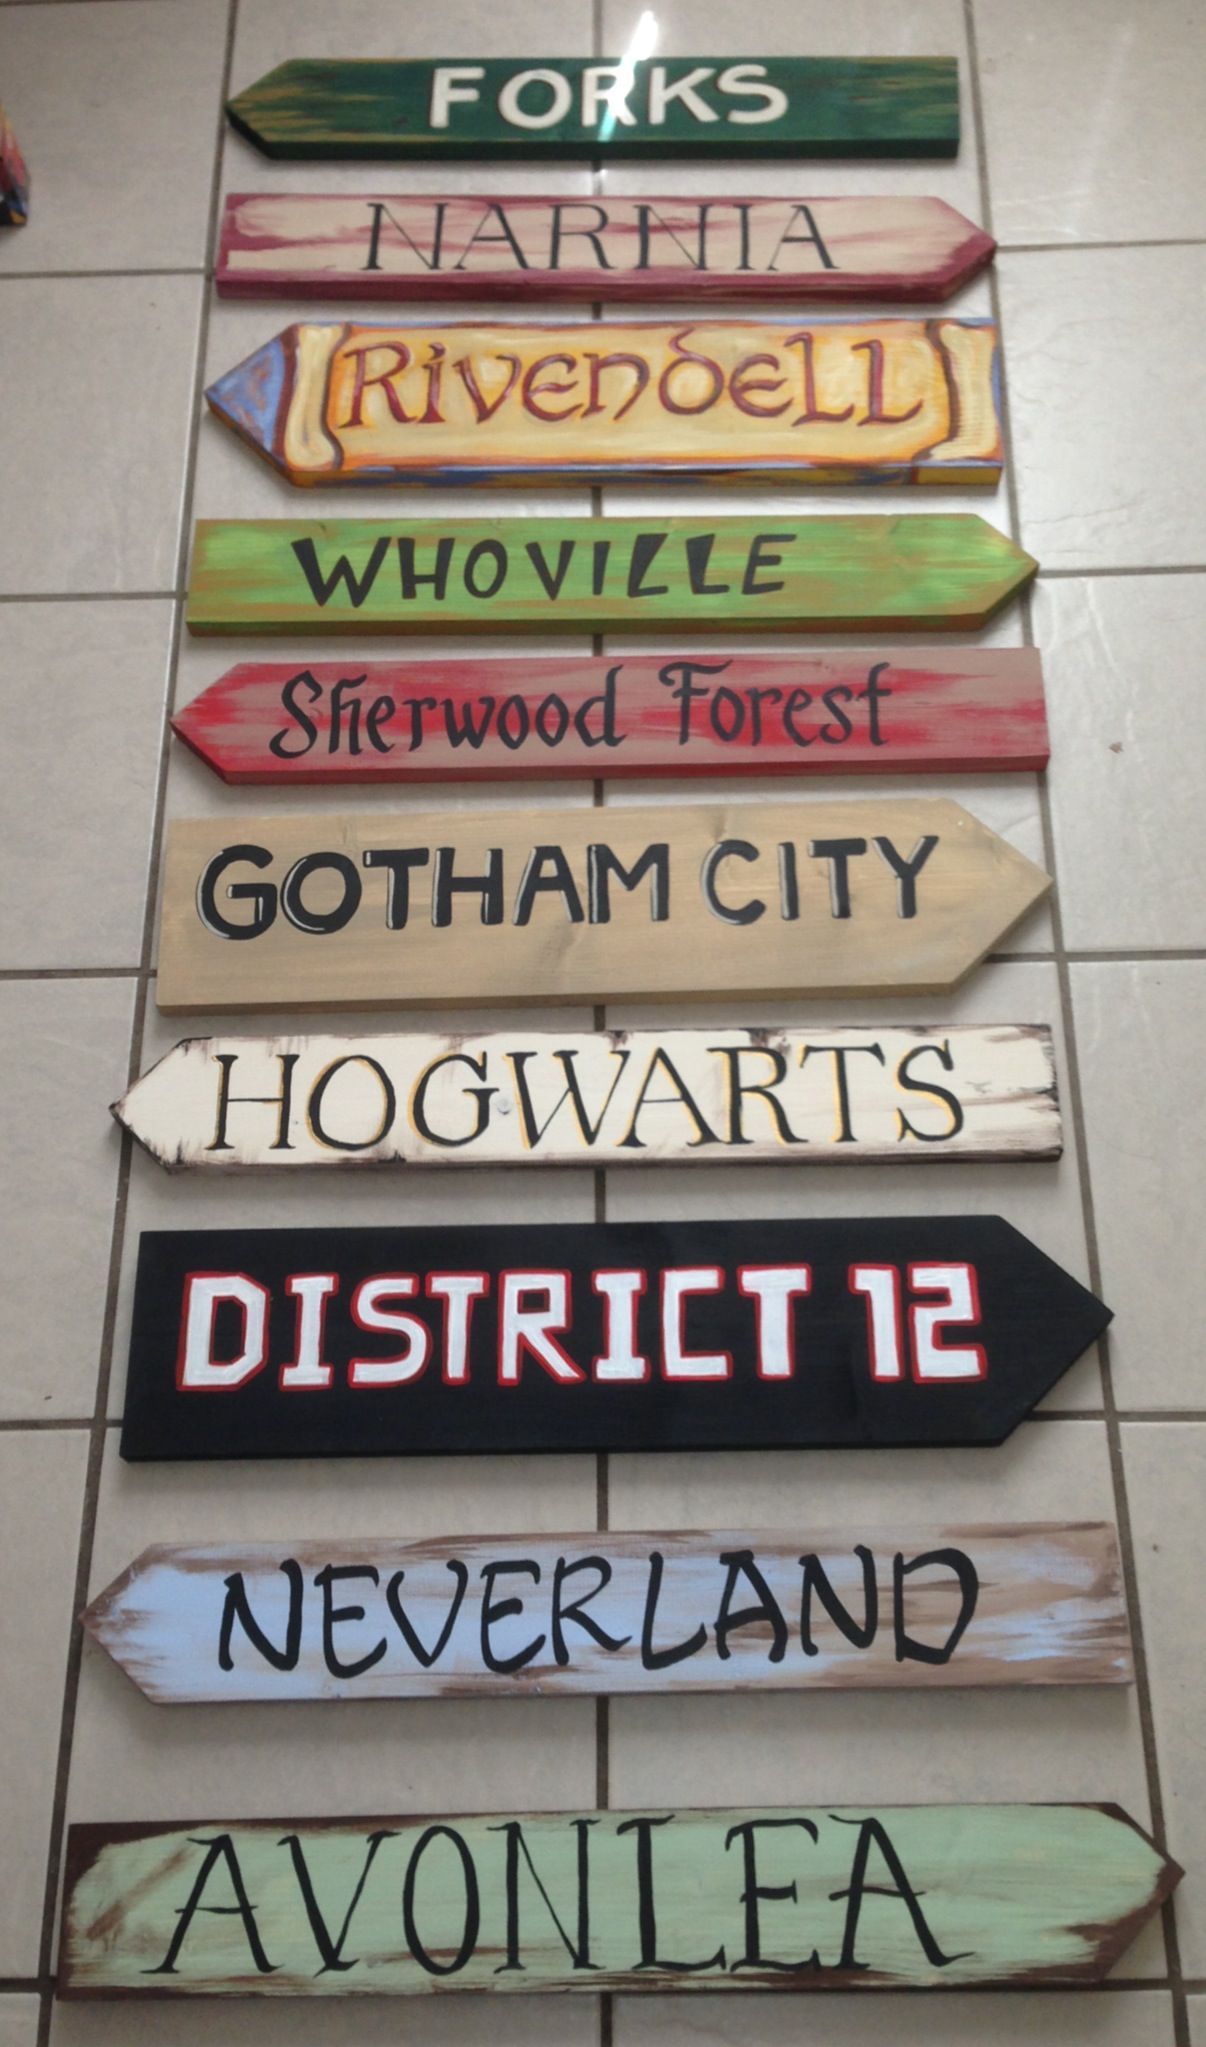 Great garden signs! Hogwarts, Narnia, Rivendell, Neverland… Which one would you be putting up?